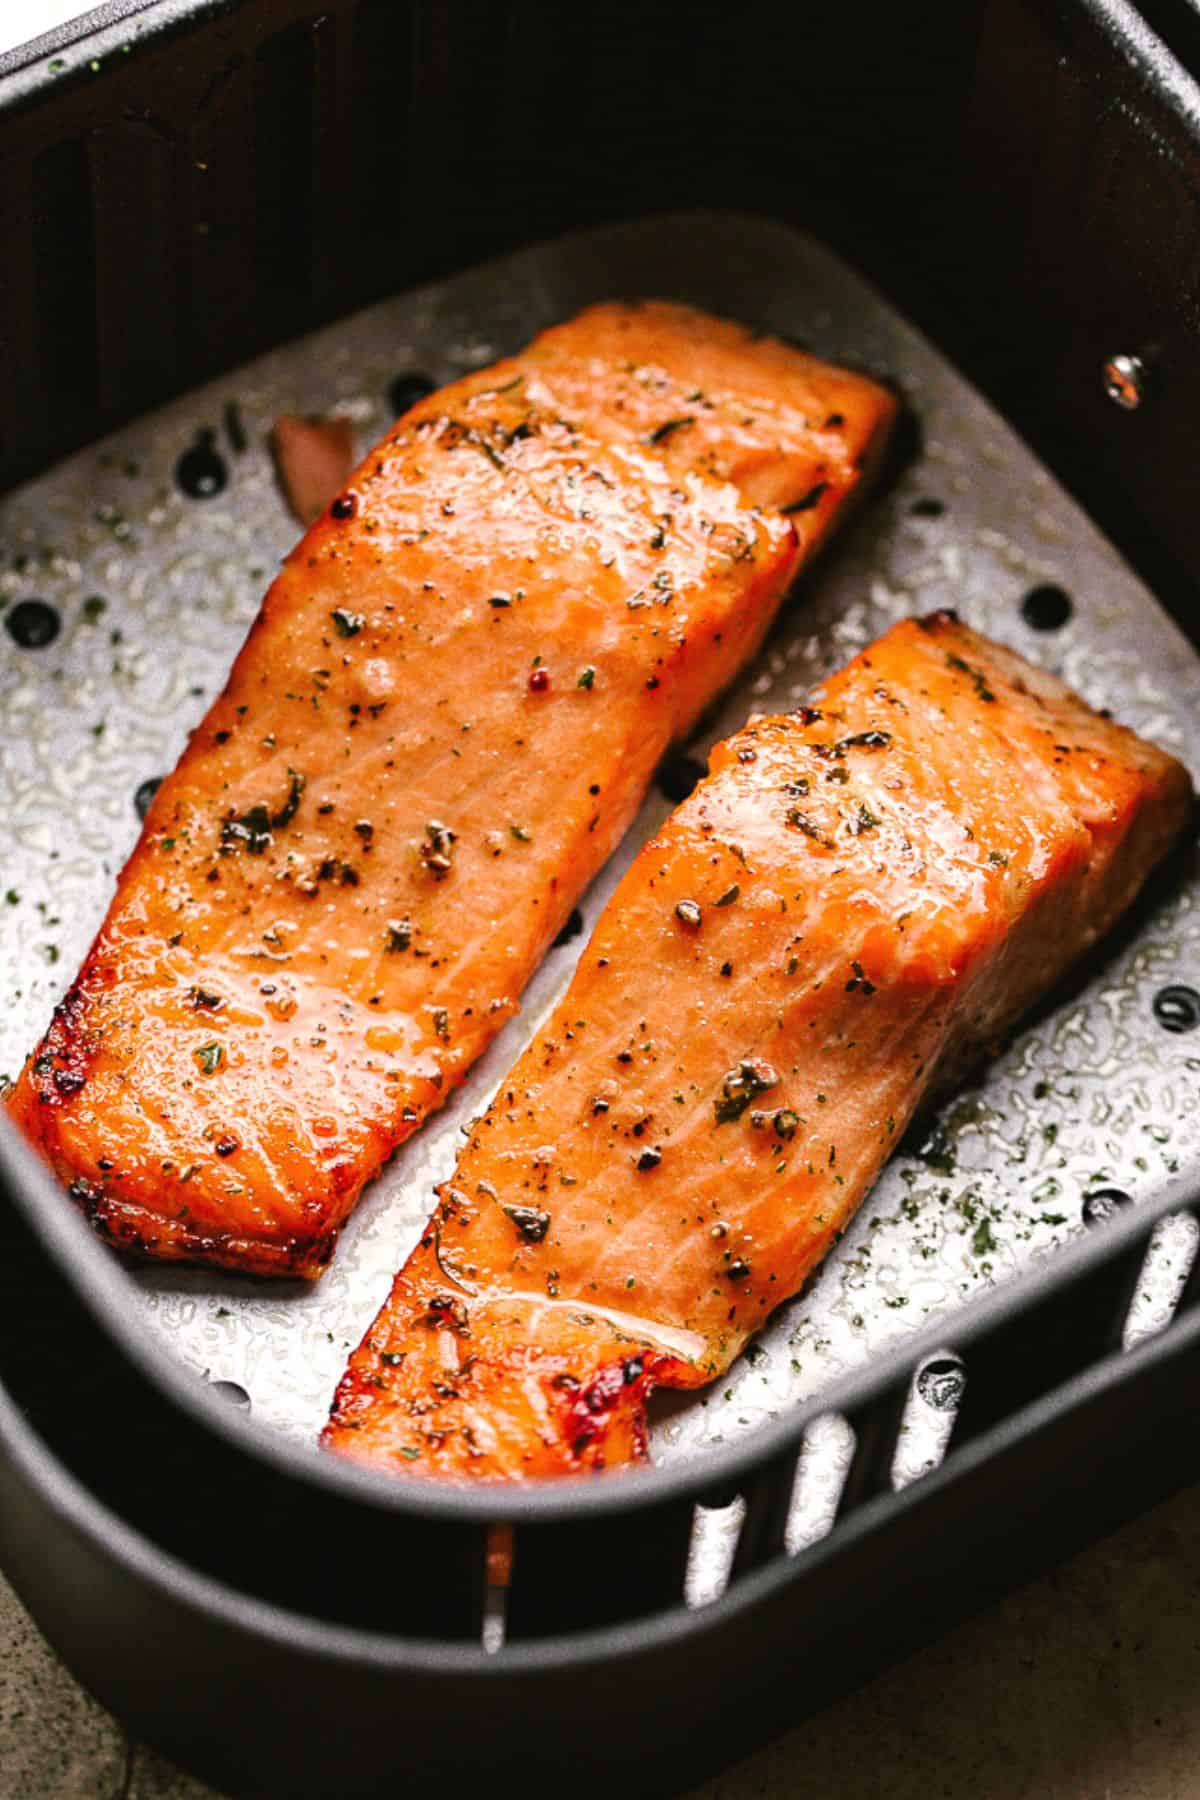 Two cooked salmon fillets in a black air fryer basket.